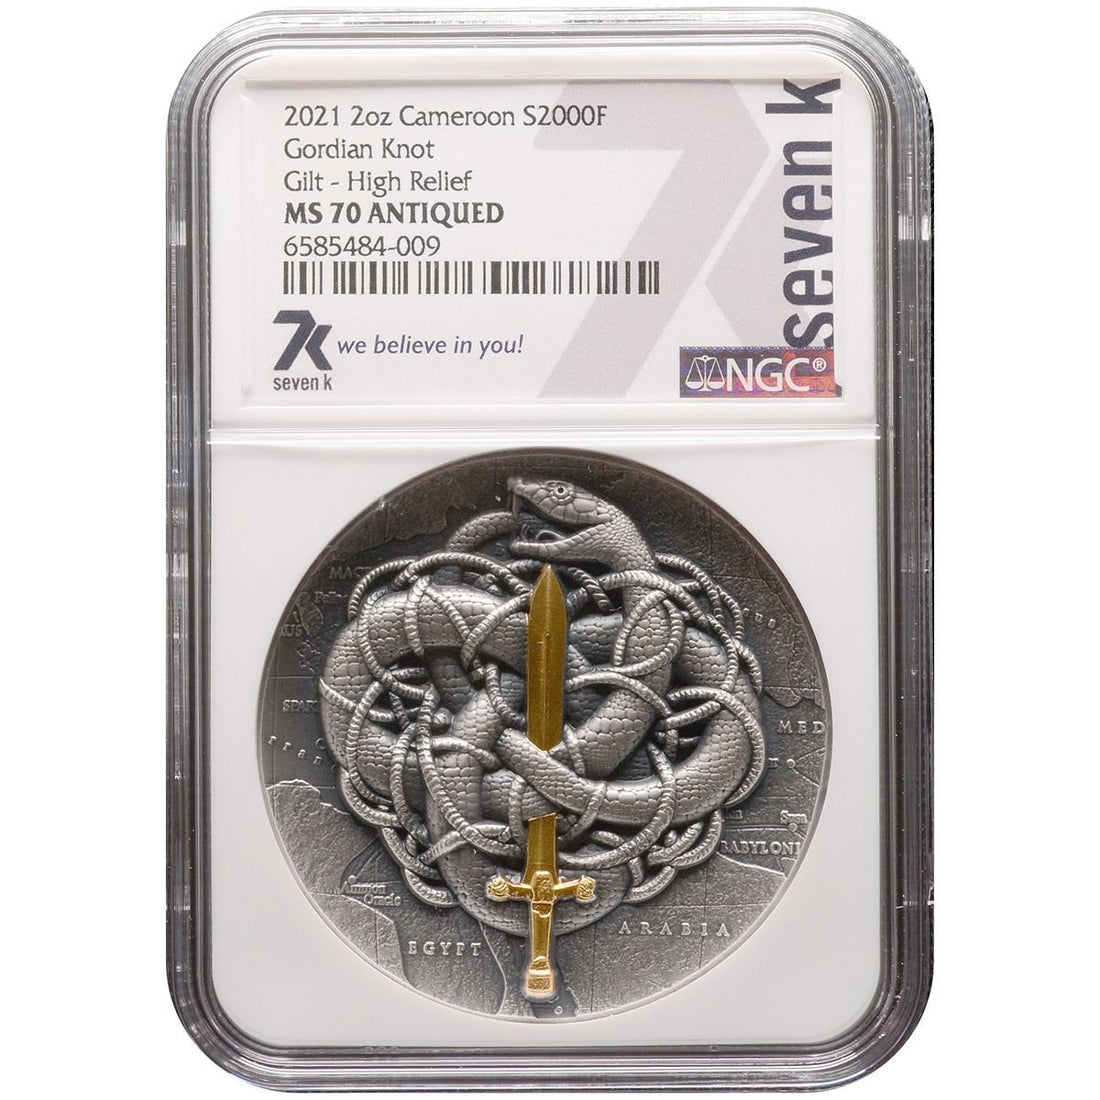 2021 Cameroon GORDIAN KNOT - Alexander the Great 2 oz Silver Coin MS 70 - OZB